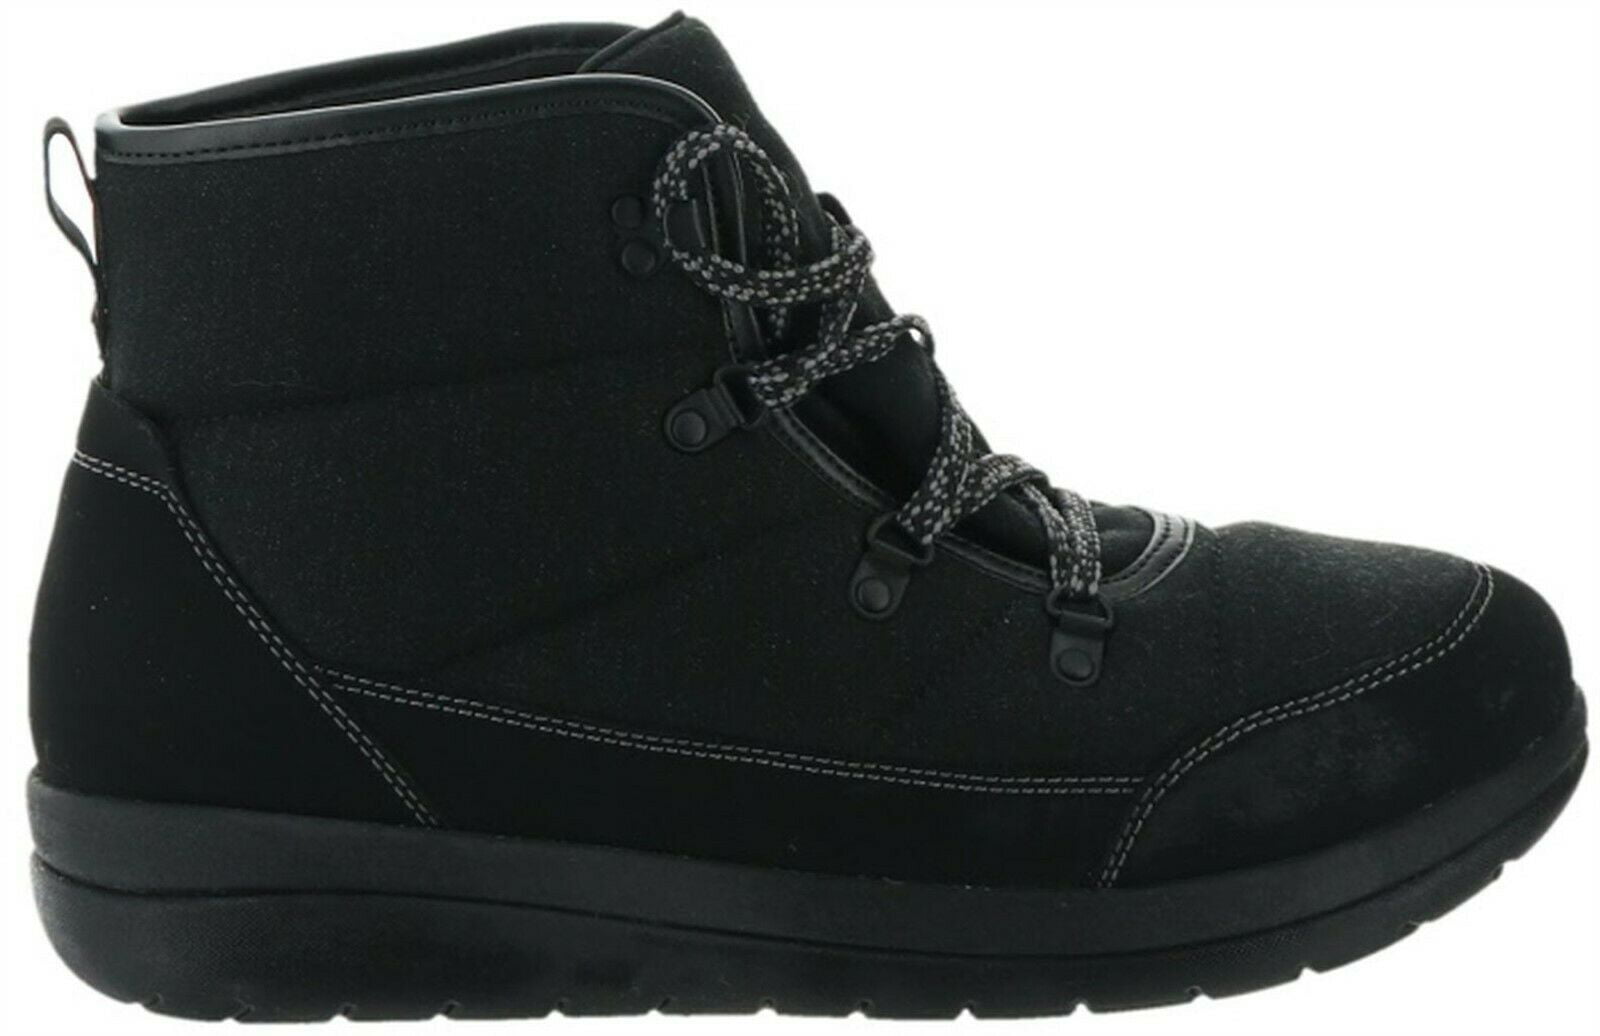 Cloudsteppers by Clarks - CLOUDSTEPPERS Clarks Lace-up Boots Cabrini ...